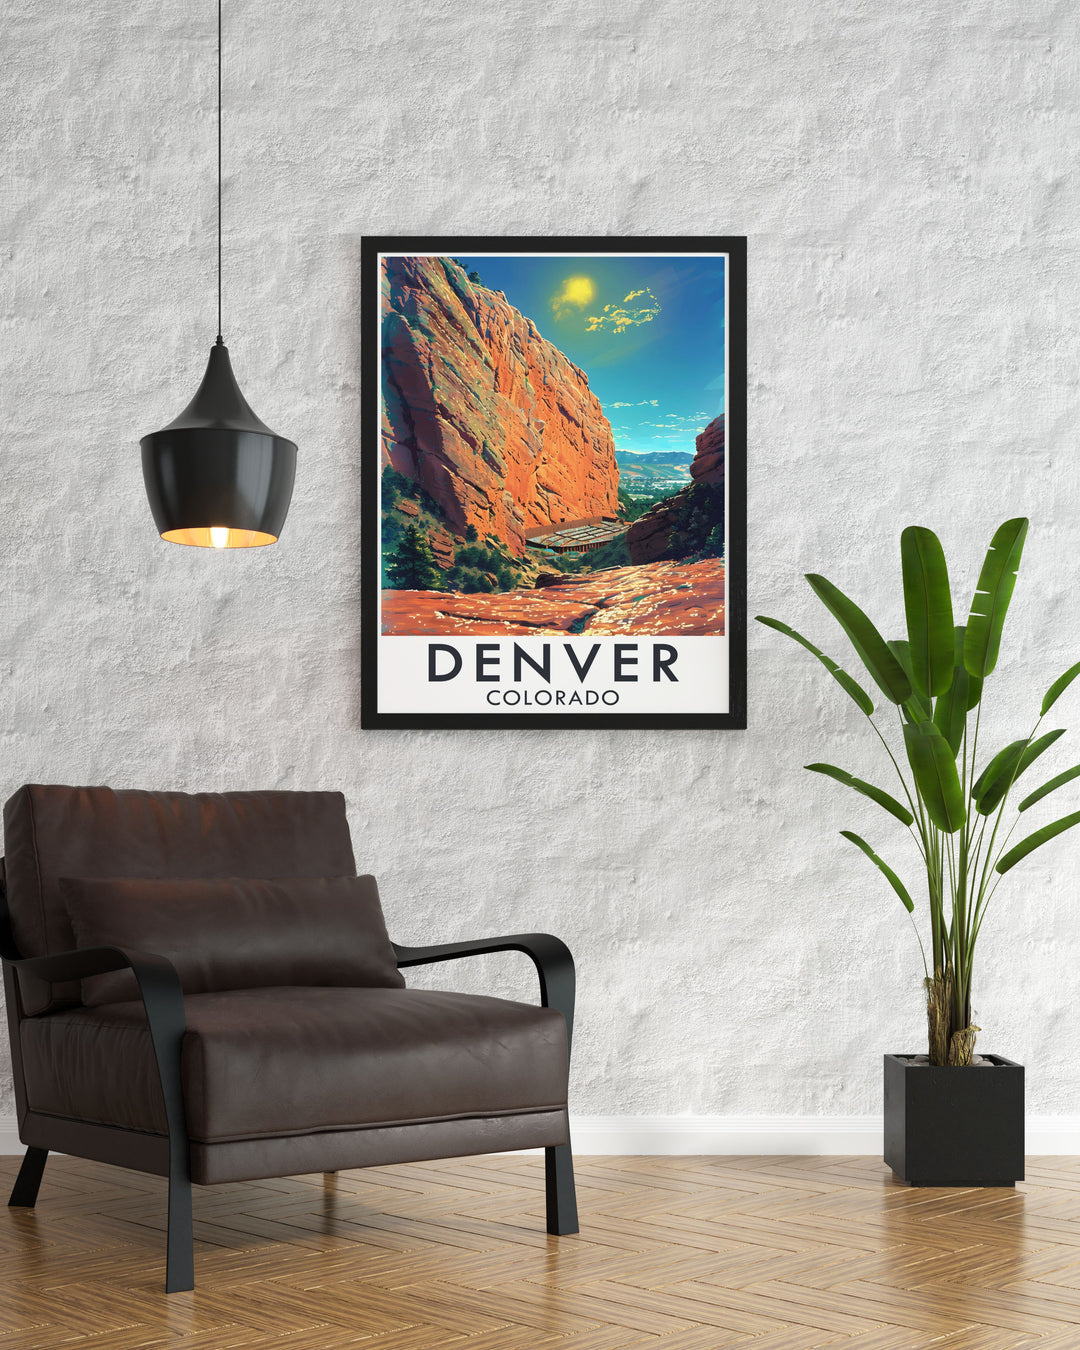 Featuring the Red Rocks Amphitheatre, this poster showcases the stunning natural acoustics and iconic rock formations, ideal for music lovers and travel enthusiasts alike.